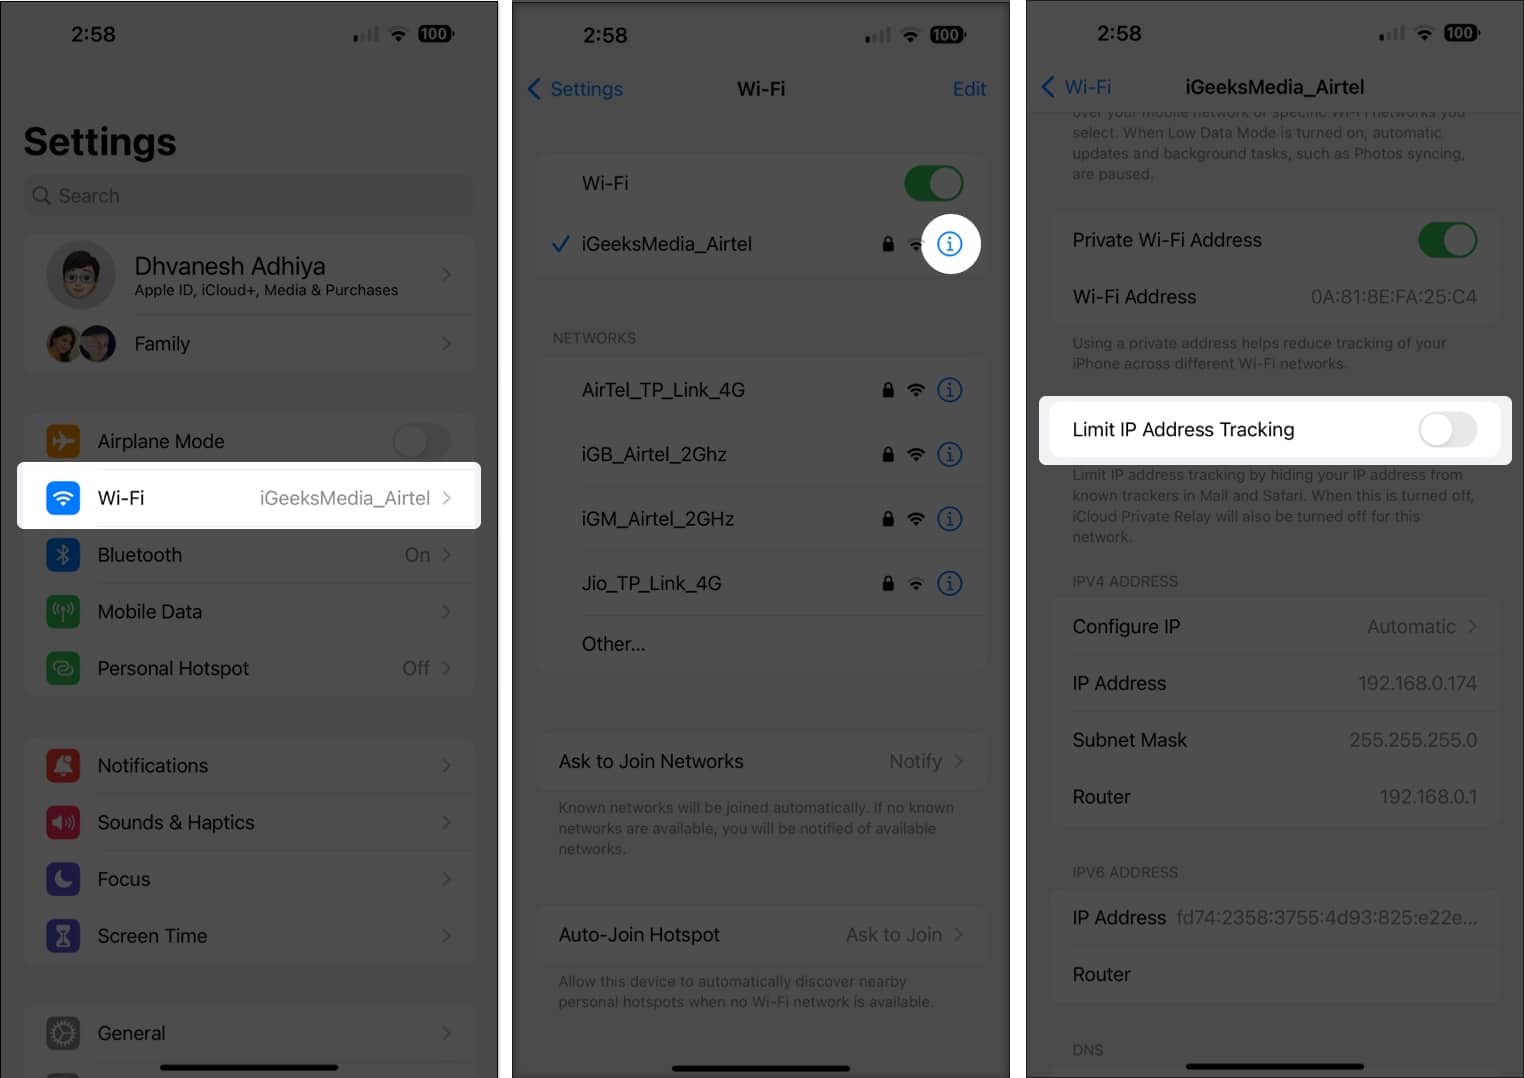 Turn on private relay on iPhone and iPad using Wifi, Go to Setting tap Wifi, Tap (i) on connected network, Toogle off ip address